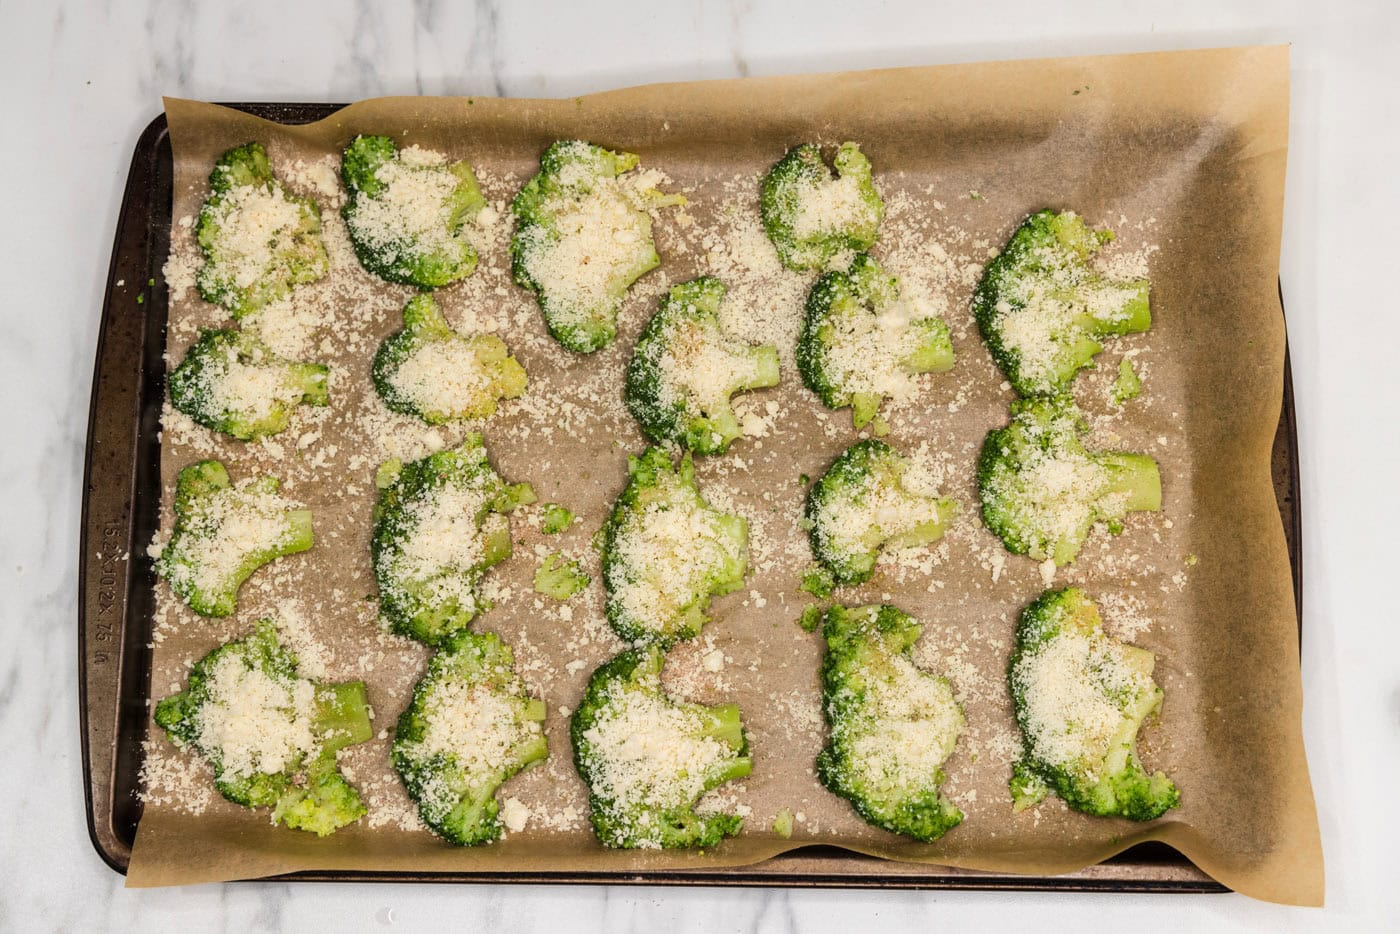 smashed broccoli florets with parmesan cheese